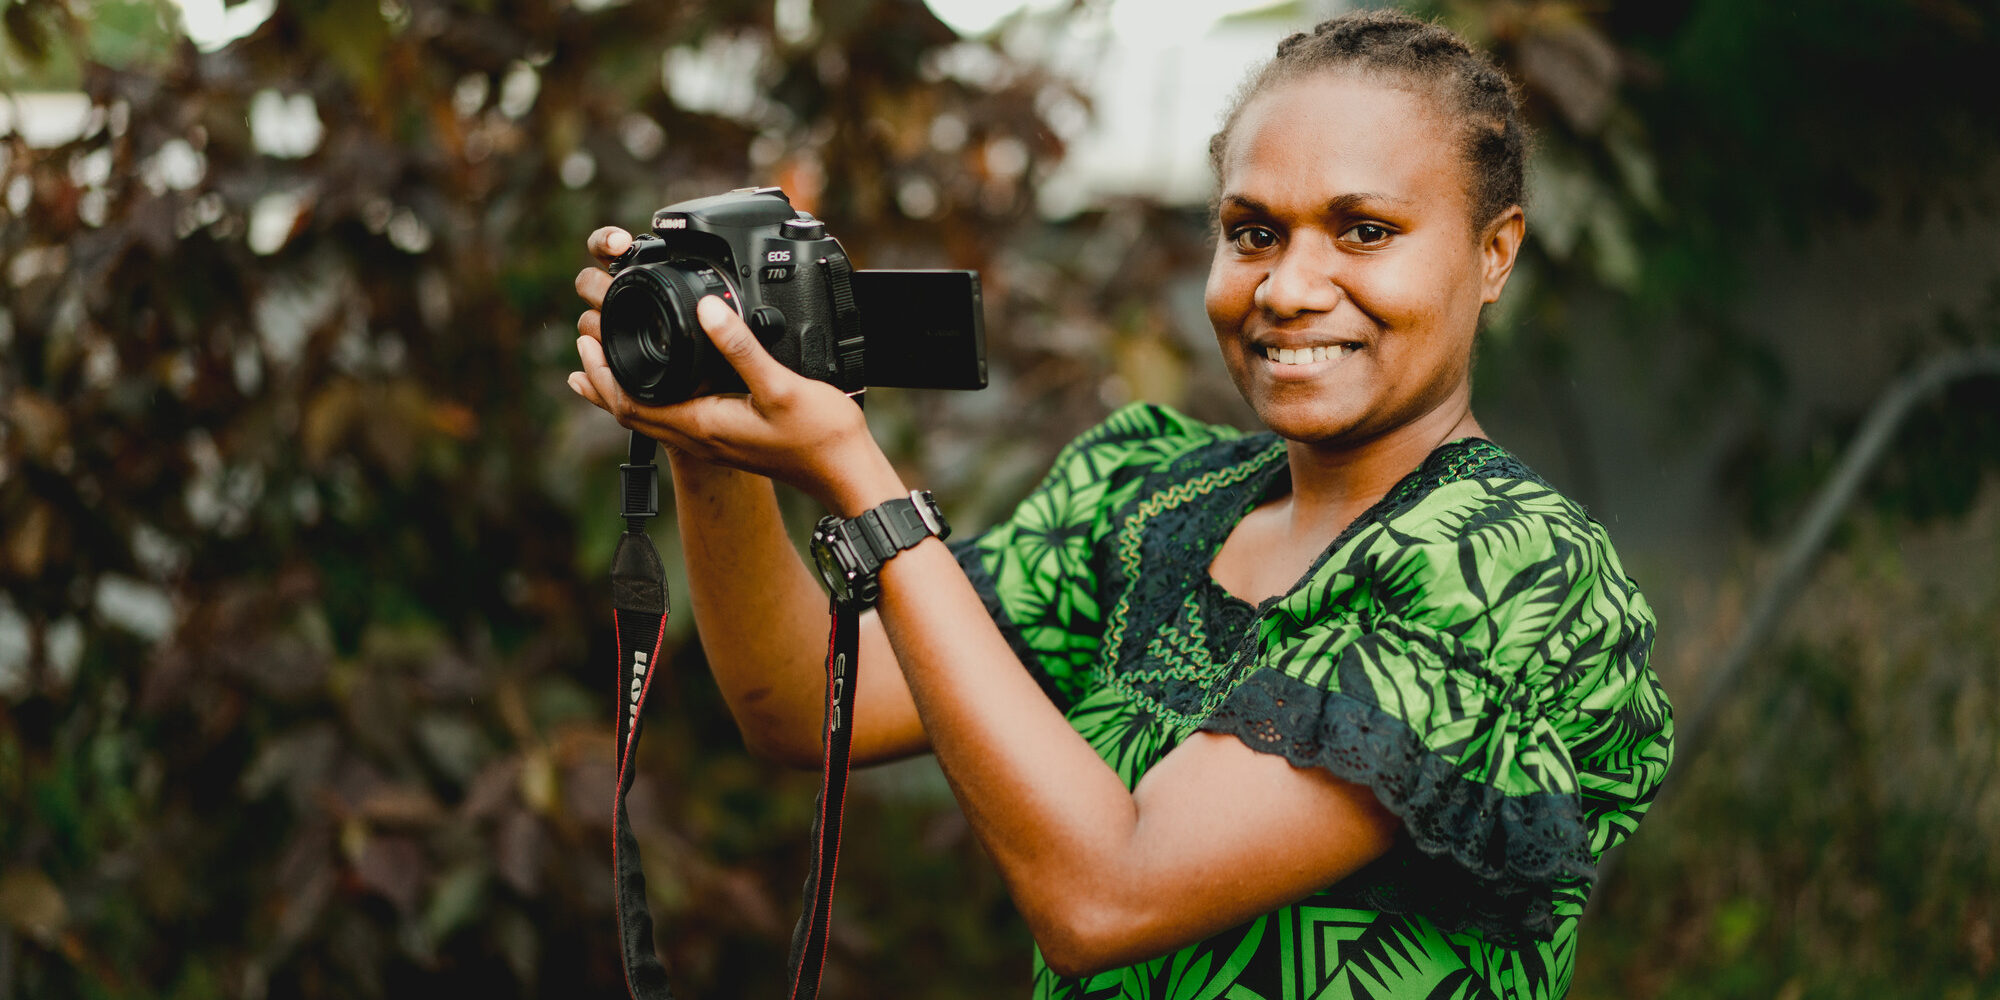 Ann-Ruth has worked with Further Arts, a Vanuatu-based charitable association furthering Vanuatu music, media, dance, and culture. She is currently running her own small business in painting and sewing.